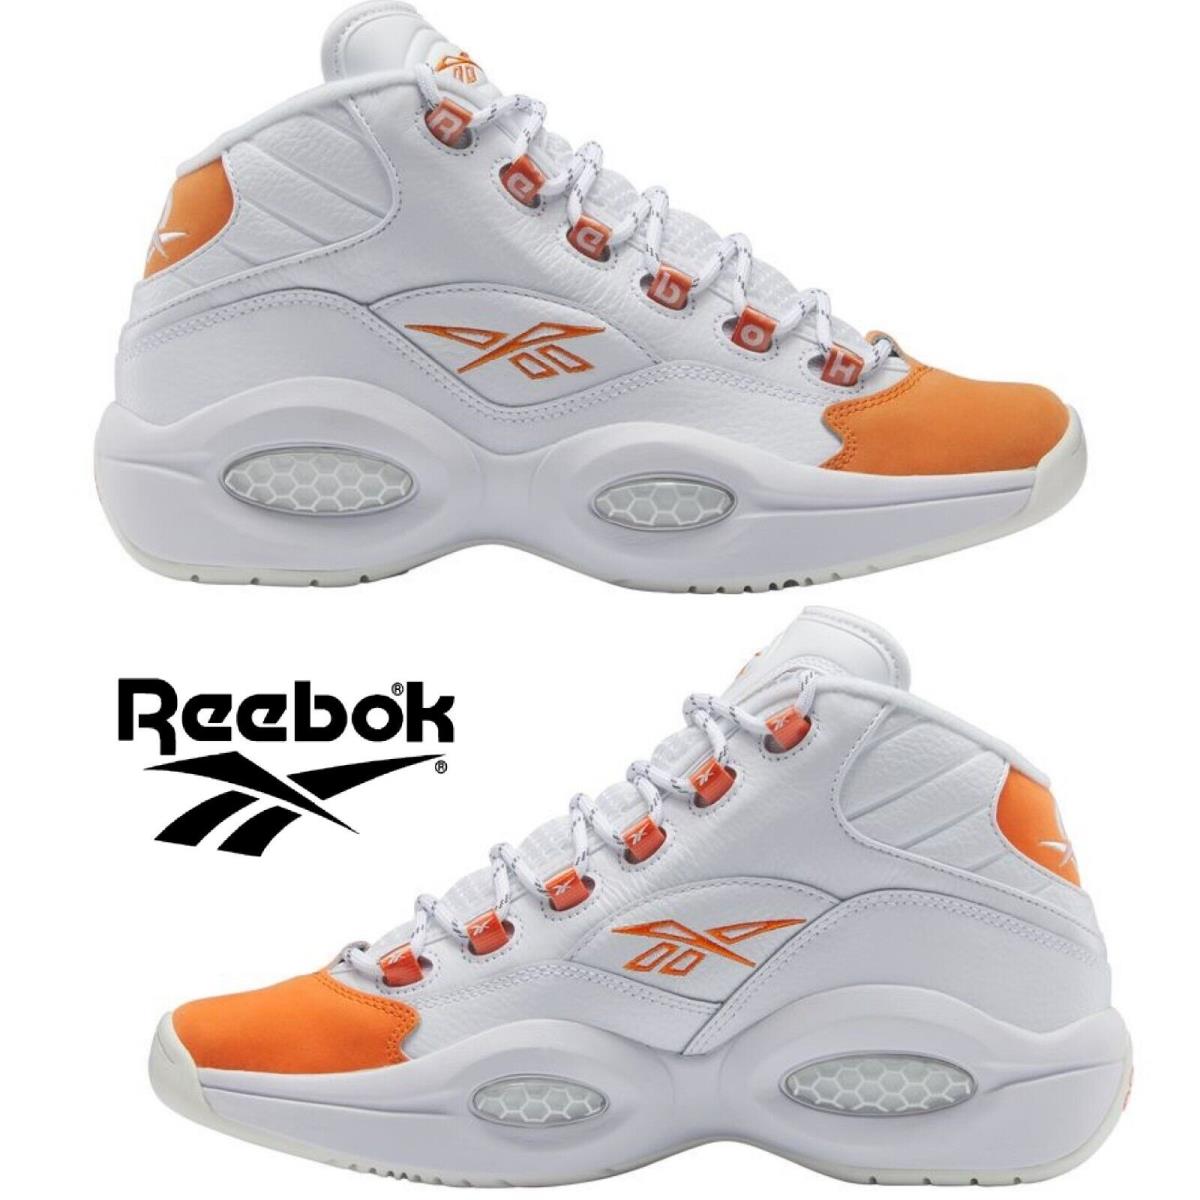 Reebok Question Mid Basketball Shoes Men`s Sneakers Running Casual Sport - White, Manufacturer: White/Orange